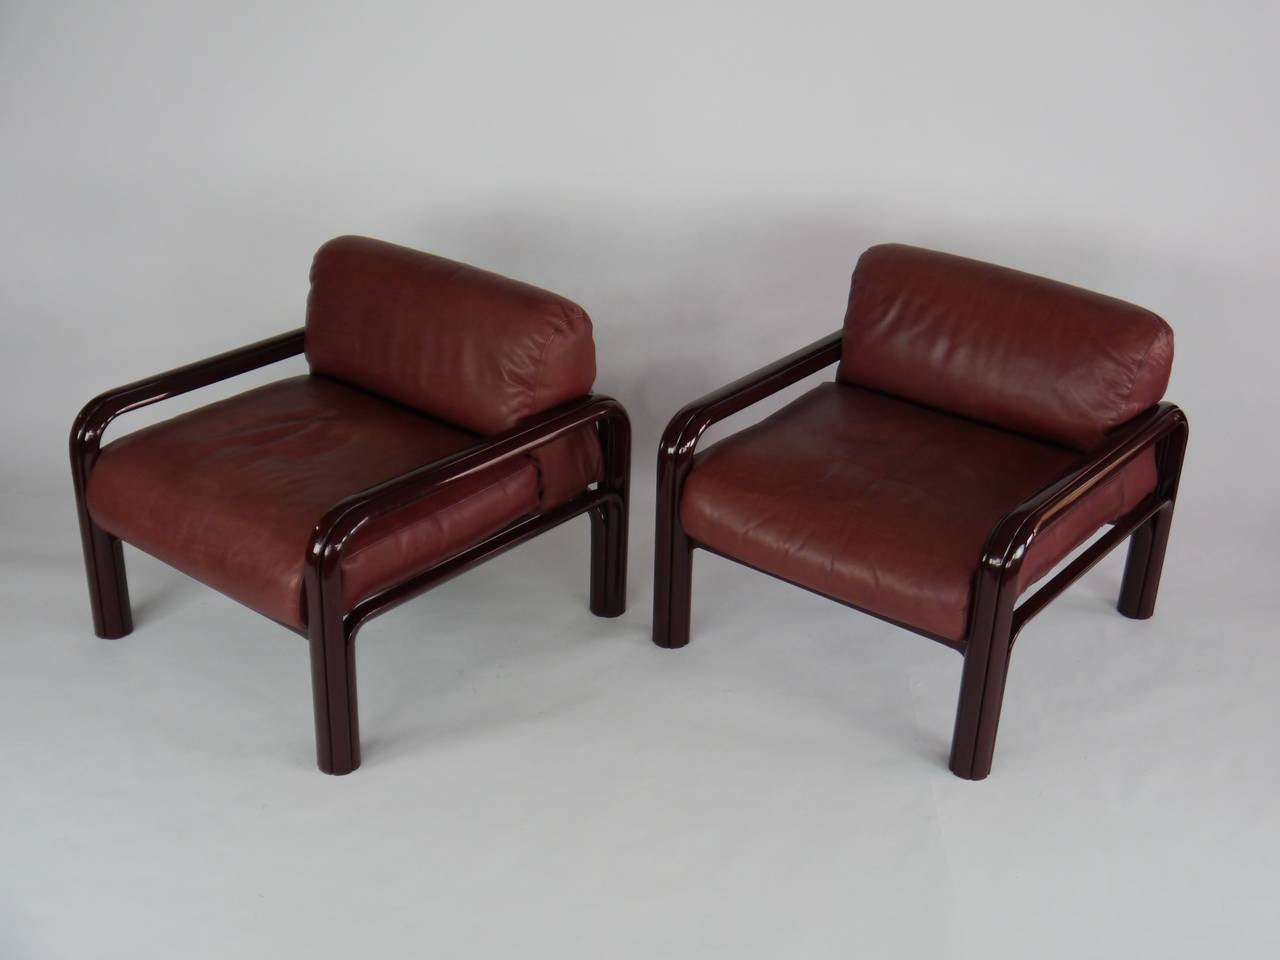 Pair of  lounge chairs designed by Gae Aulenti for Knoll (with label). Oxblood / red leather cushions and red frames. Very comfortable and very well made.